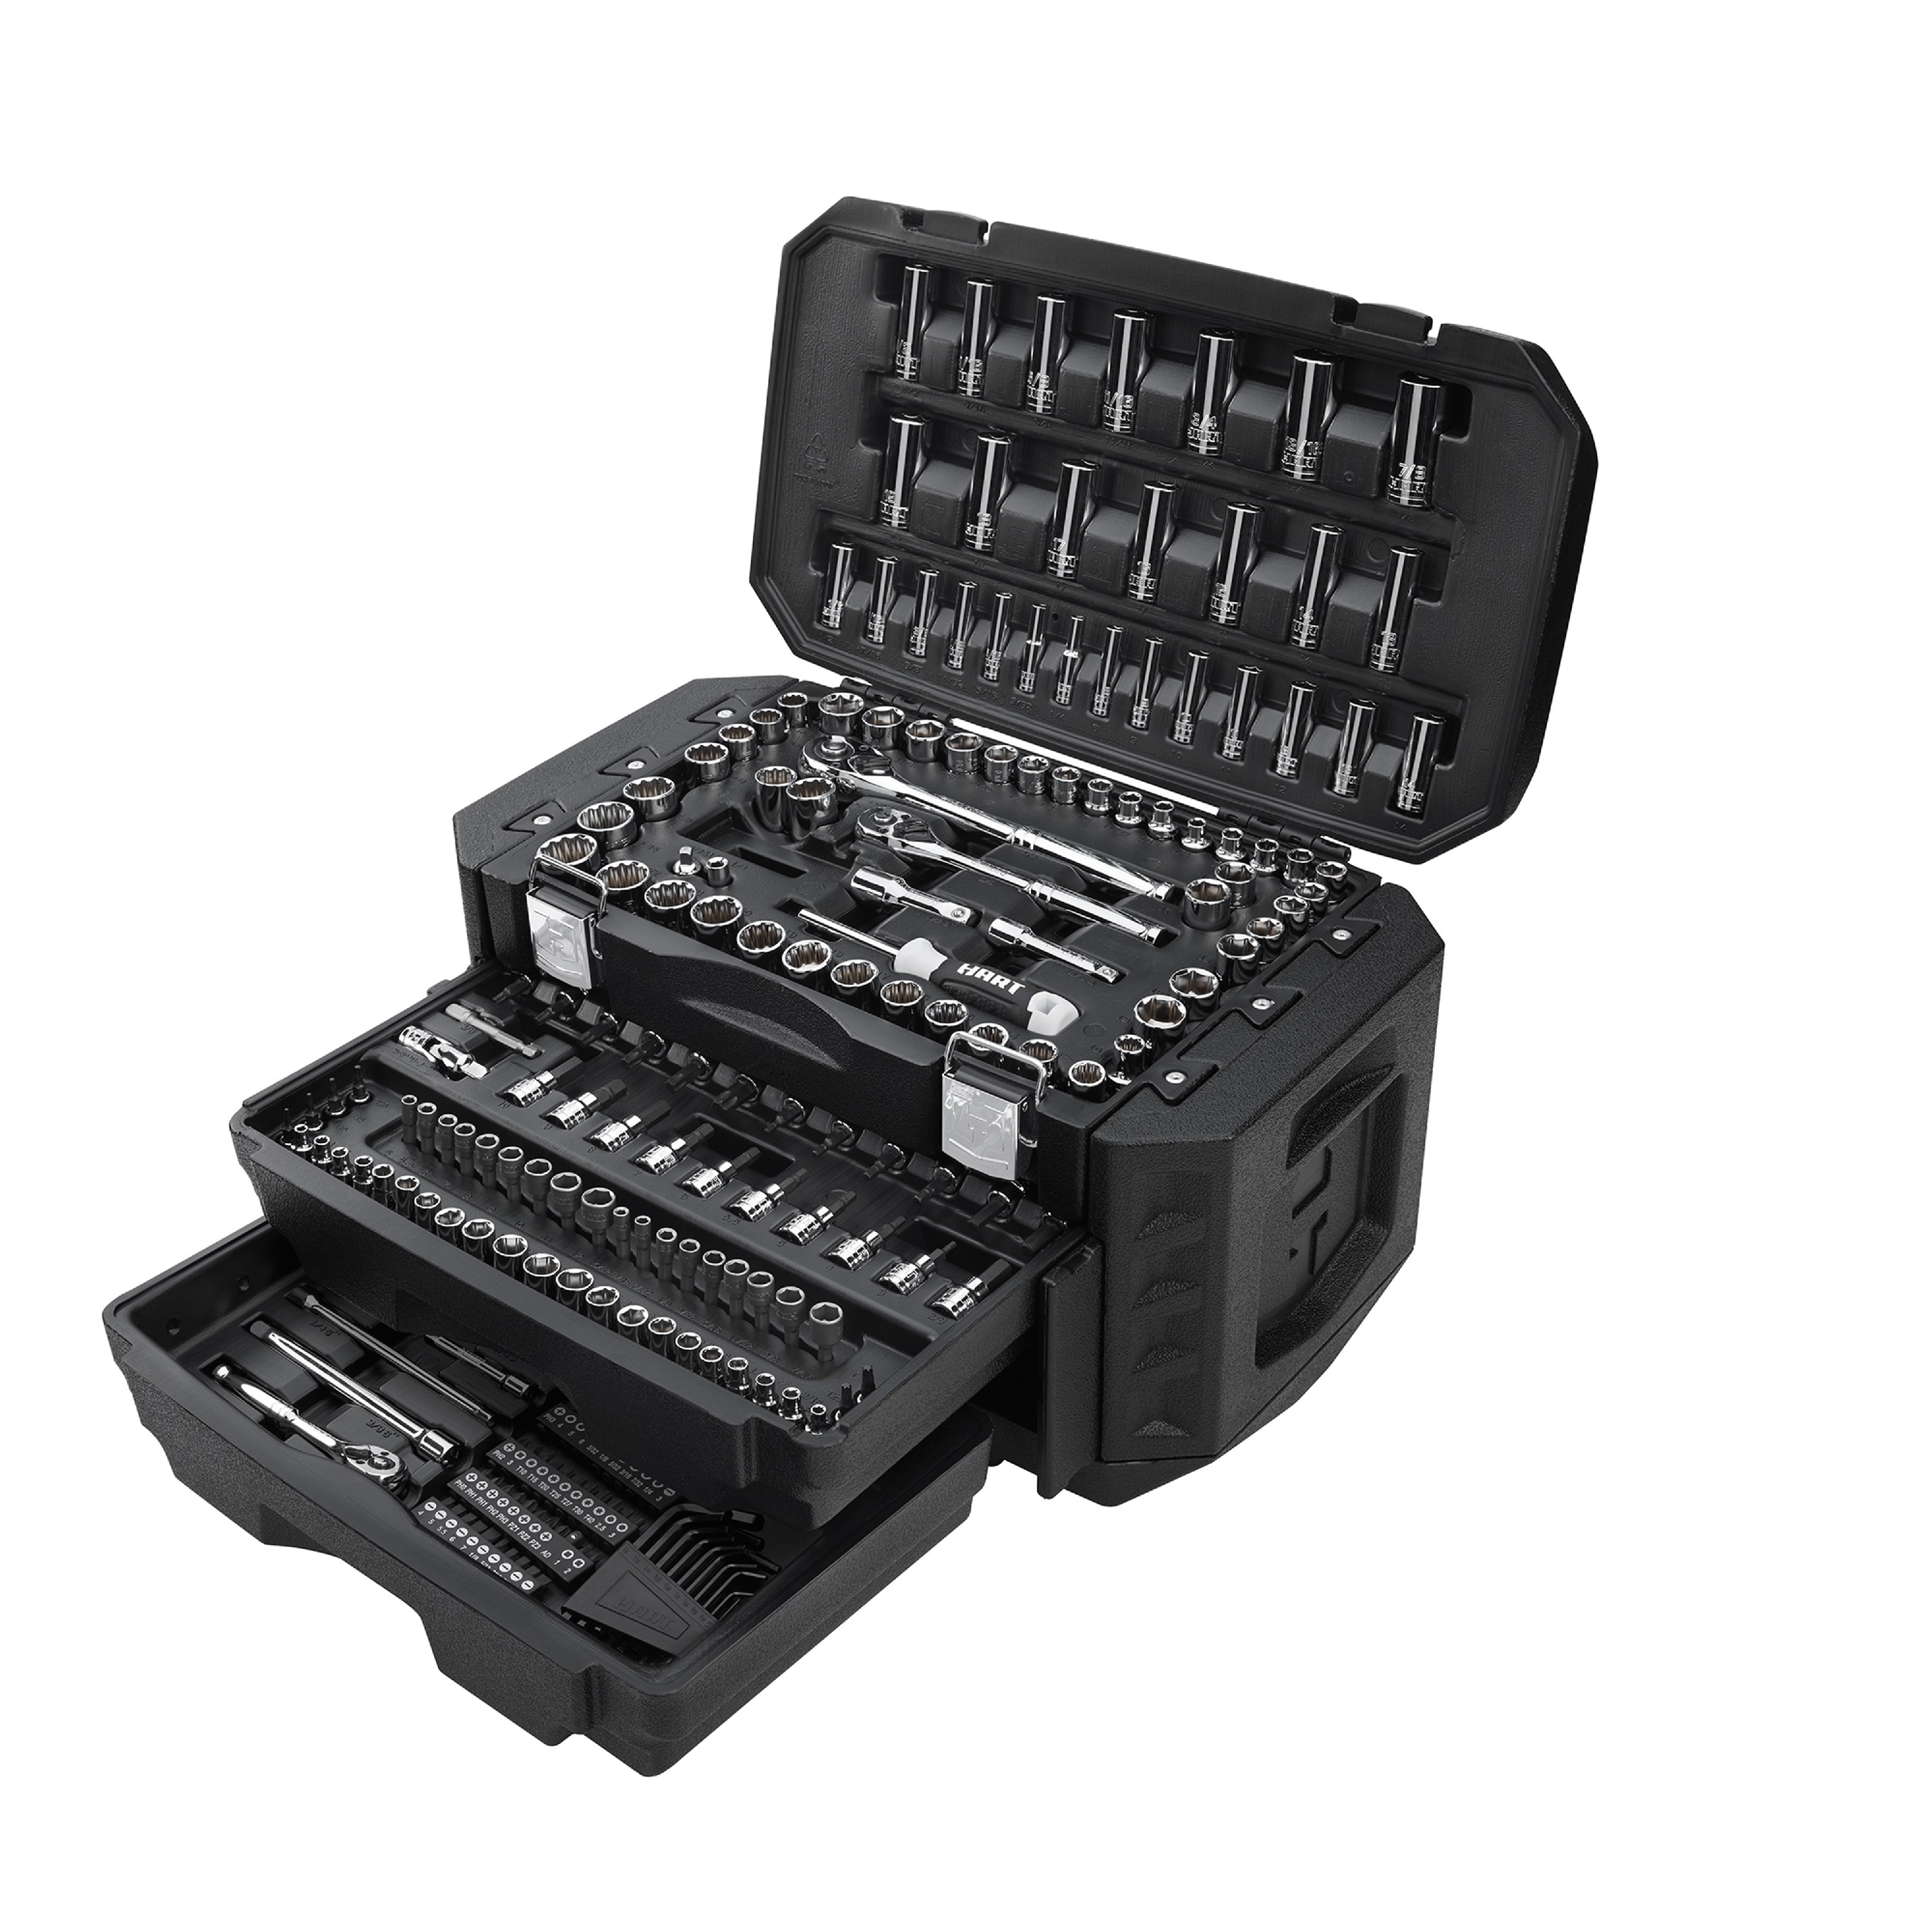 The black toolbox with silver tools